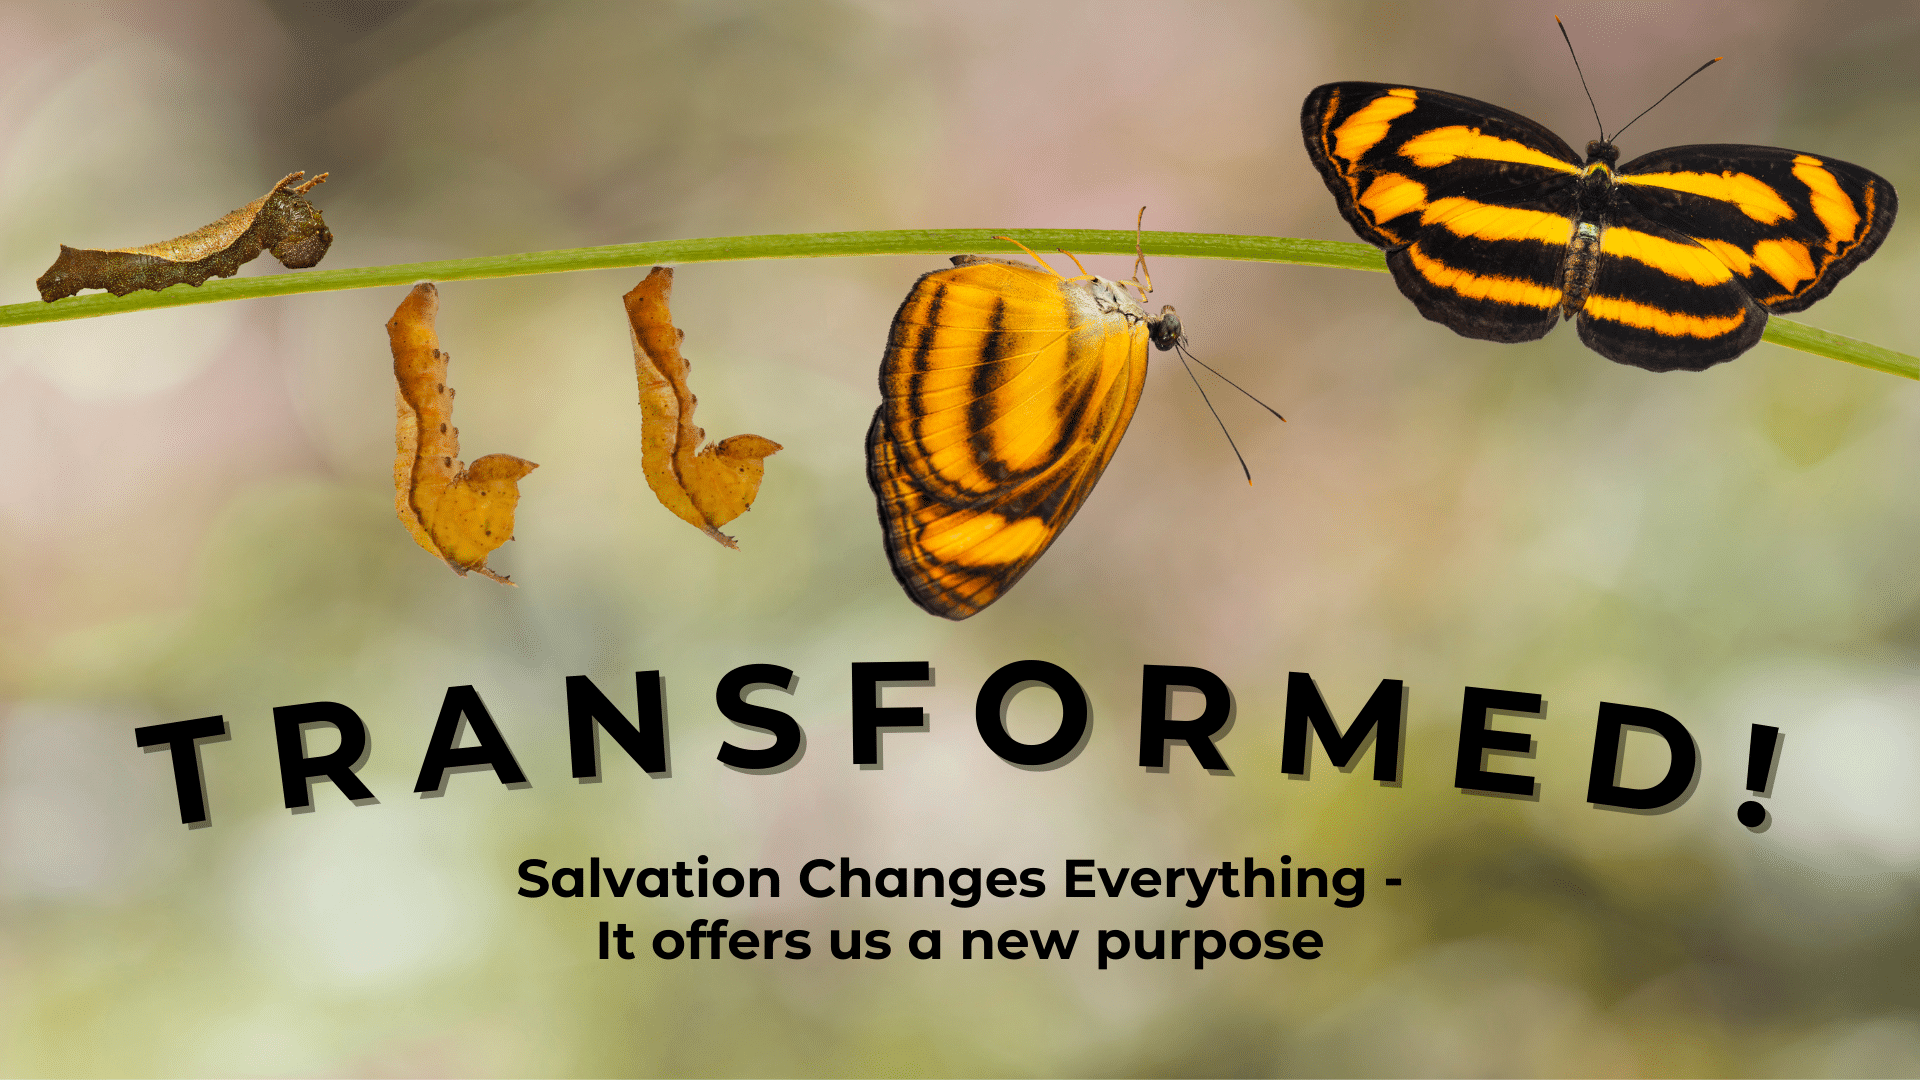 Transformed! Salvation offers us a new purpose